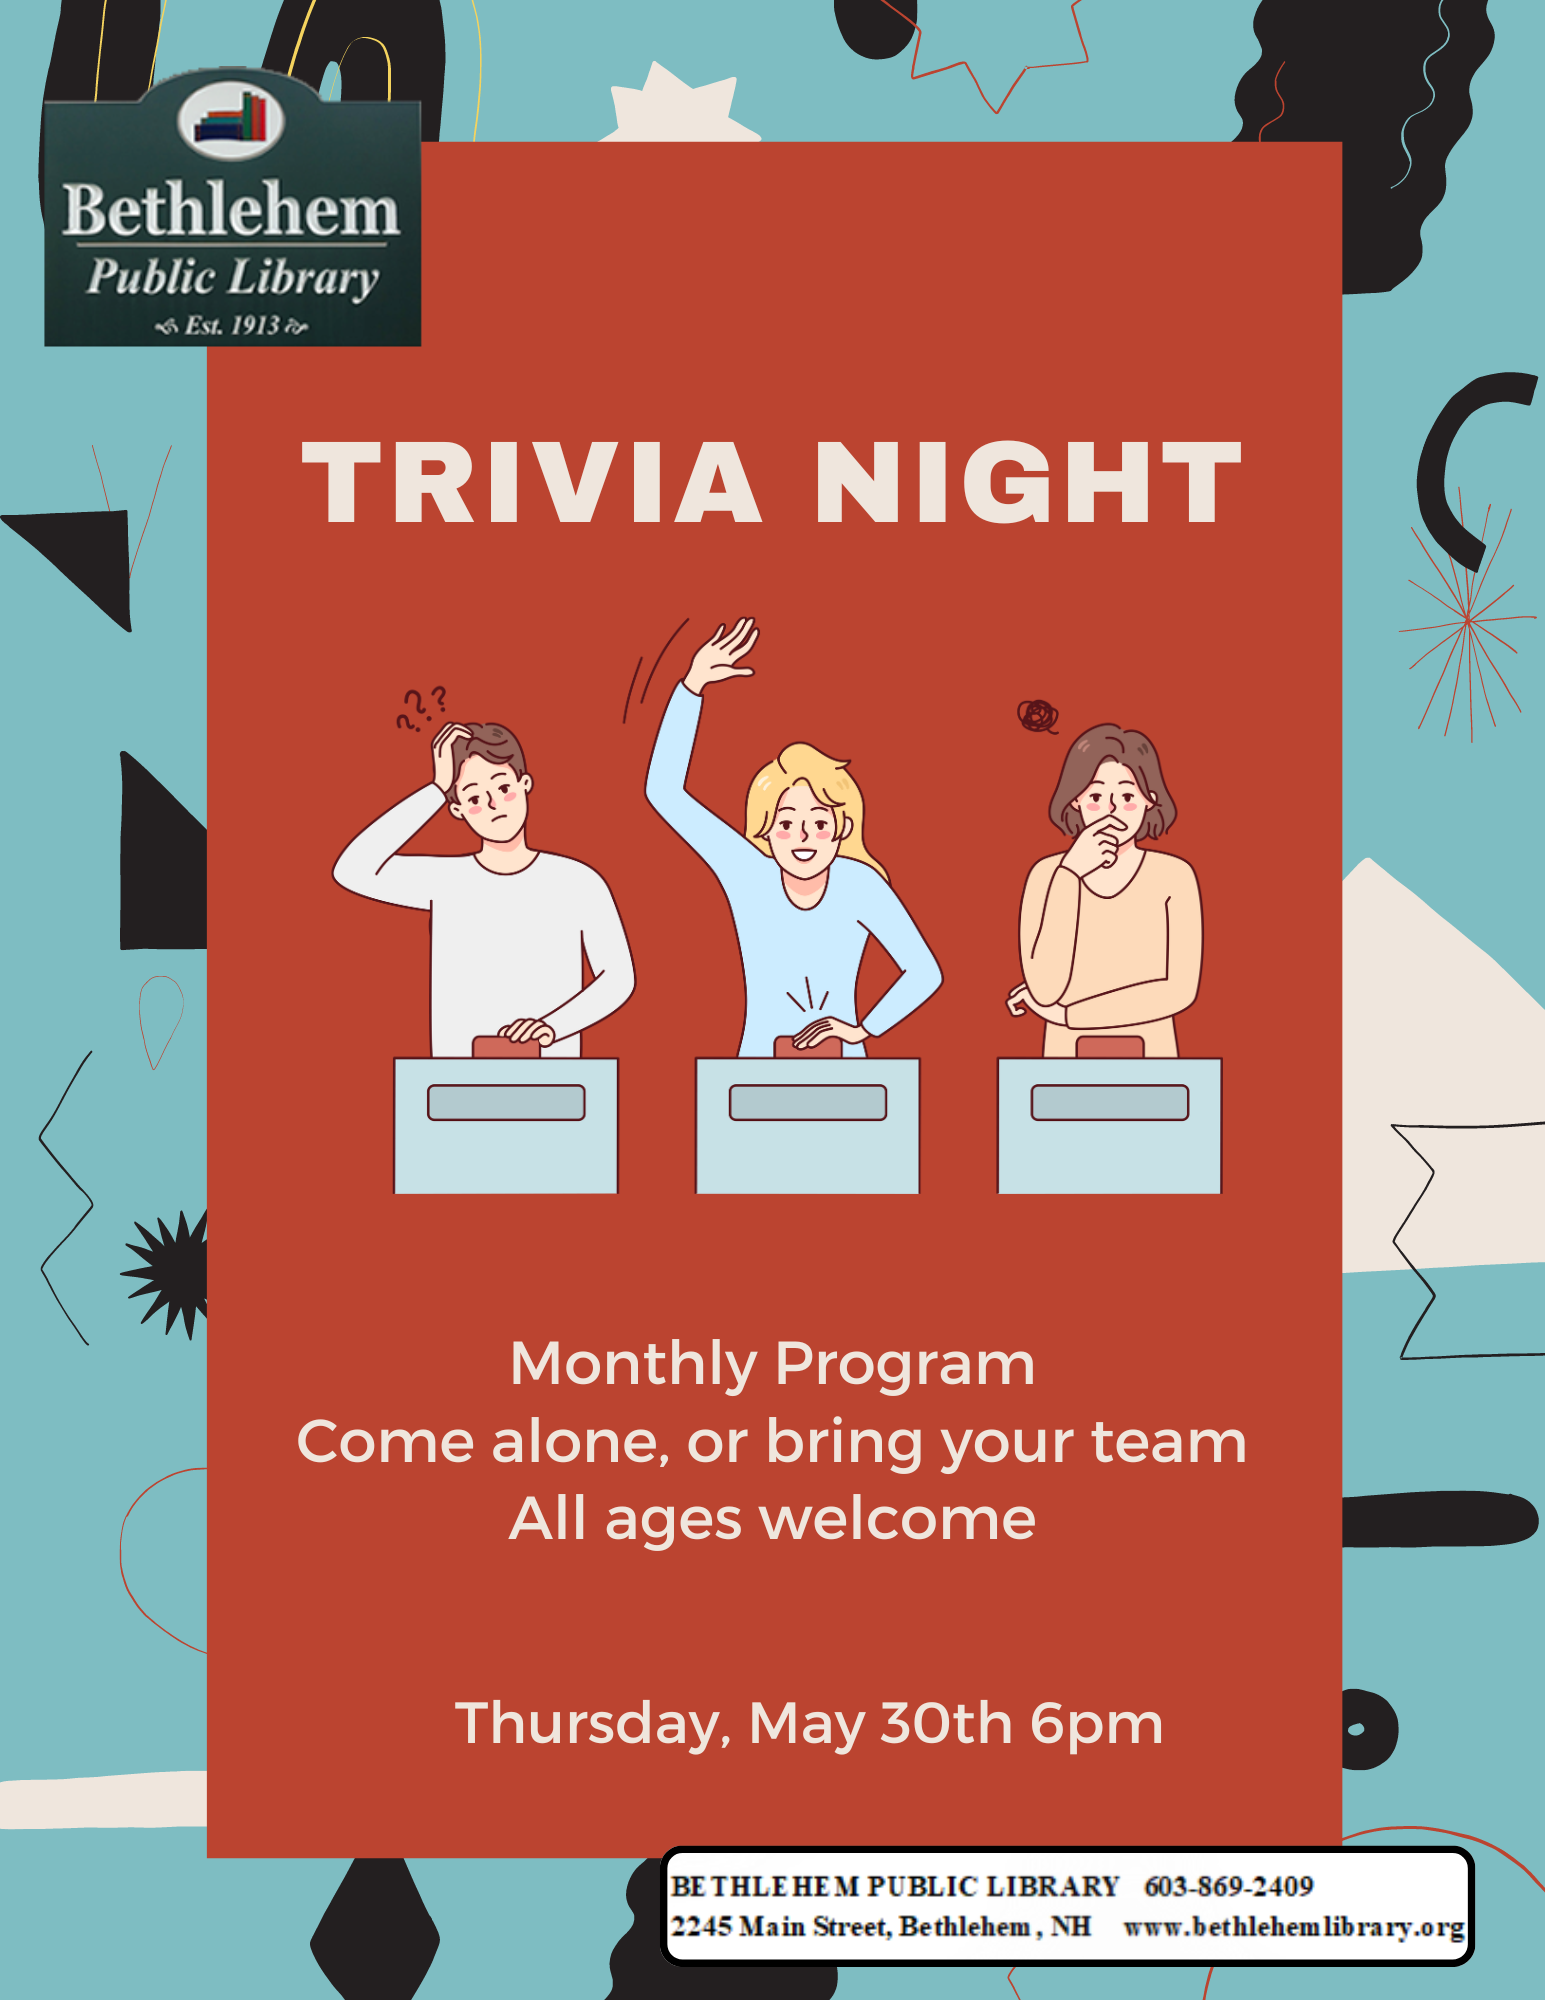 Trivia Night.  Monthly program.  Come alone, or bring your team. All ages welcome. Thursday March 28th 6pm